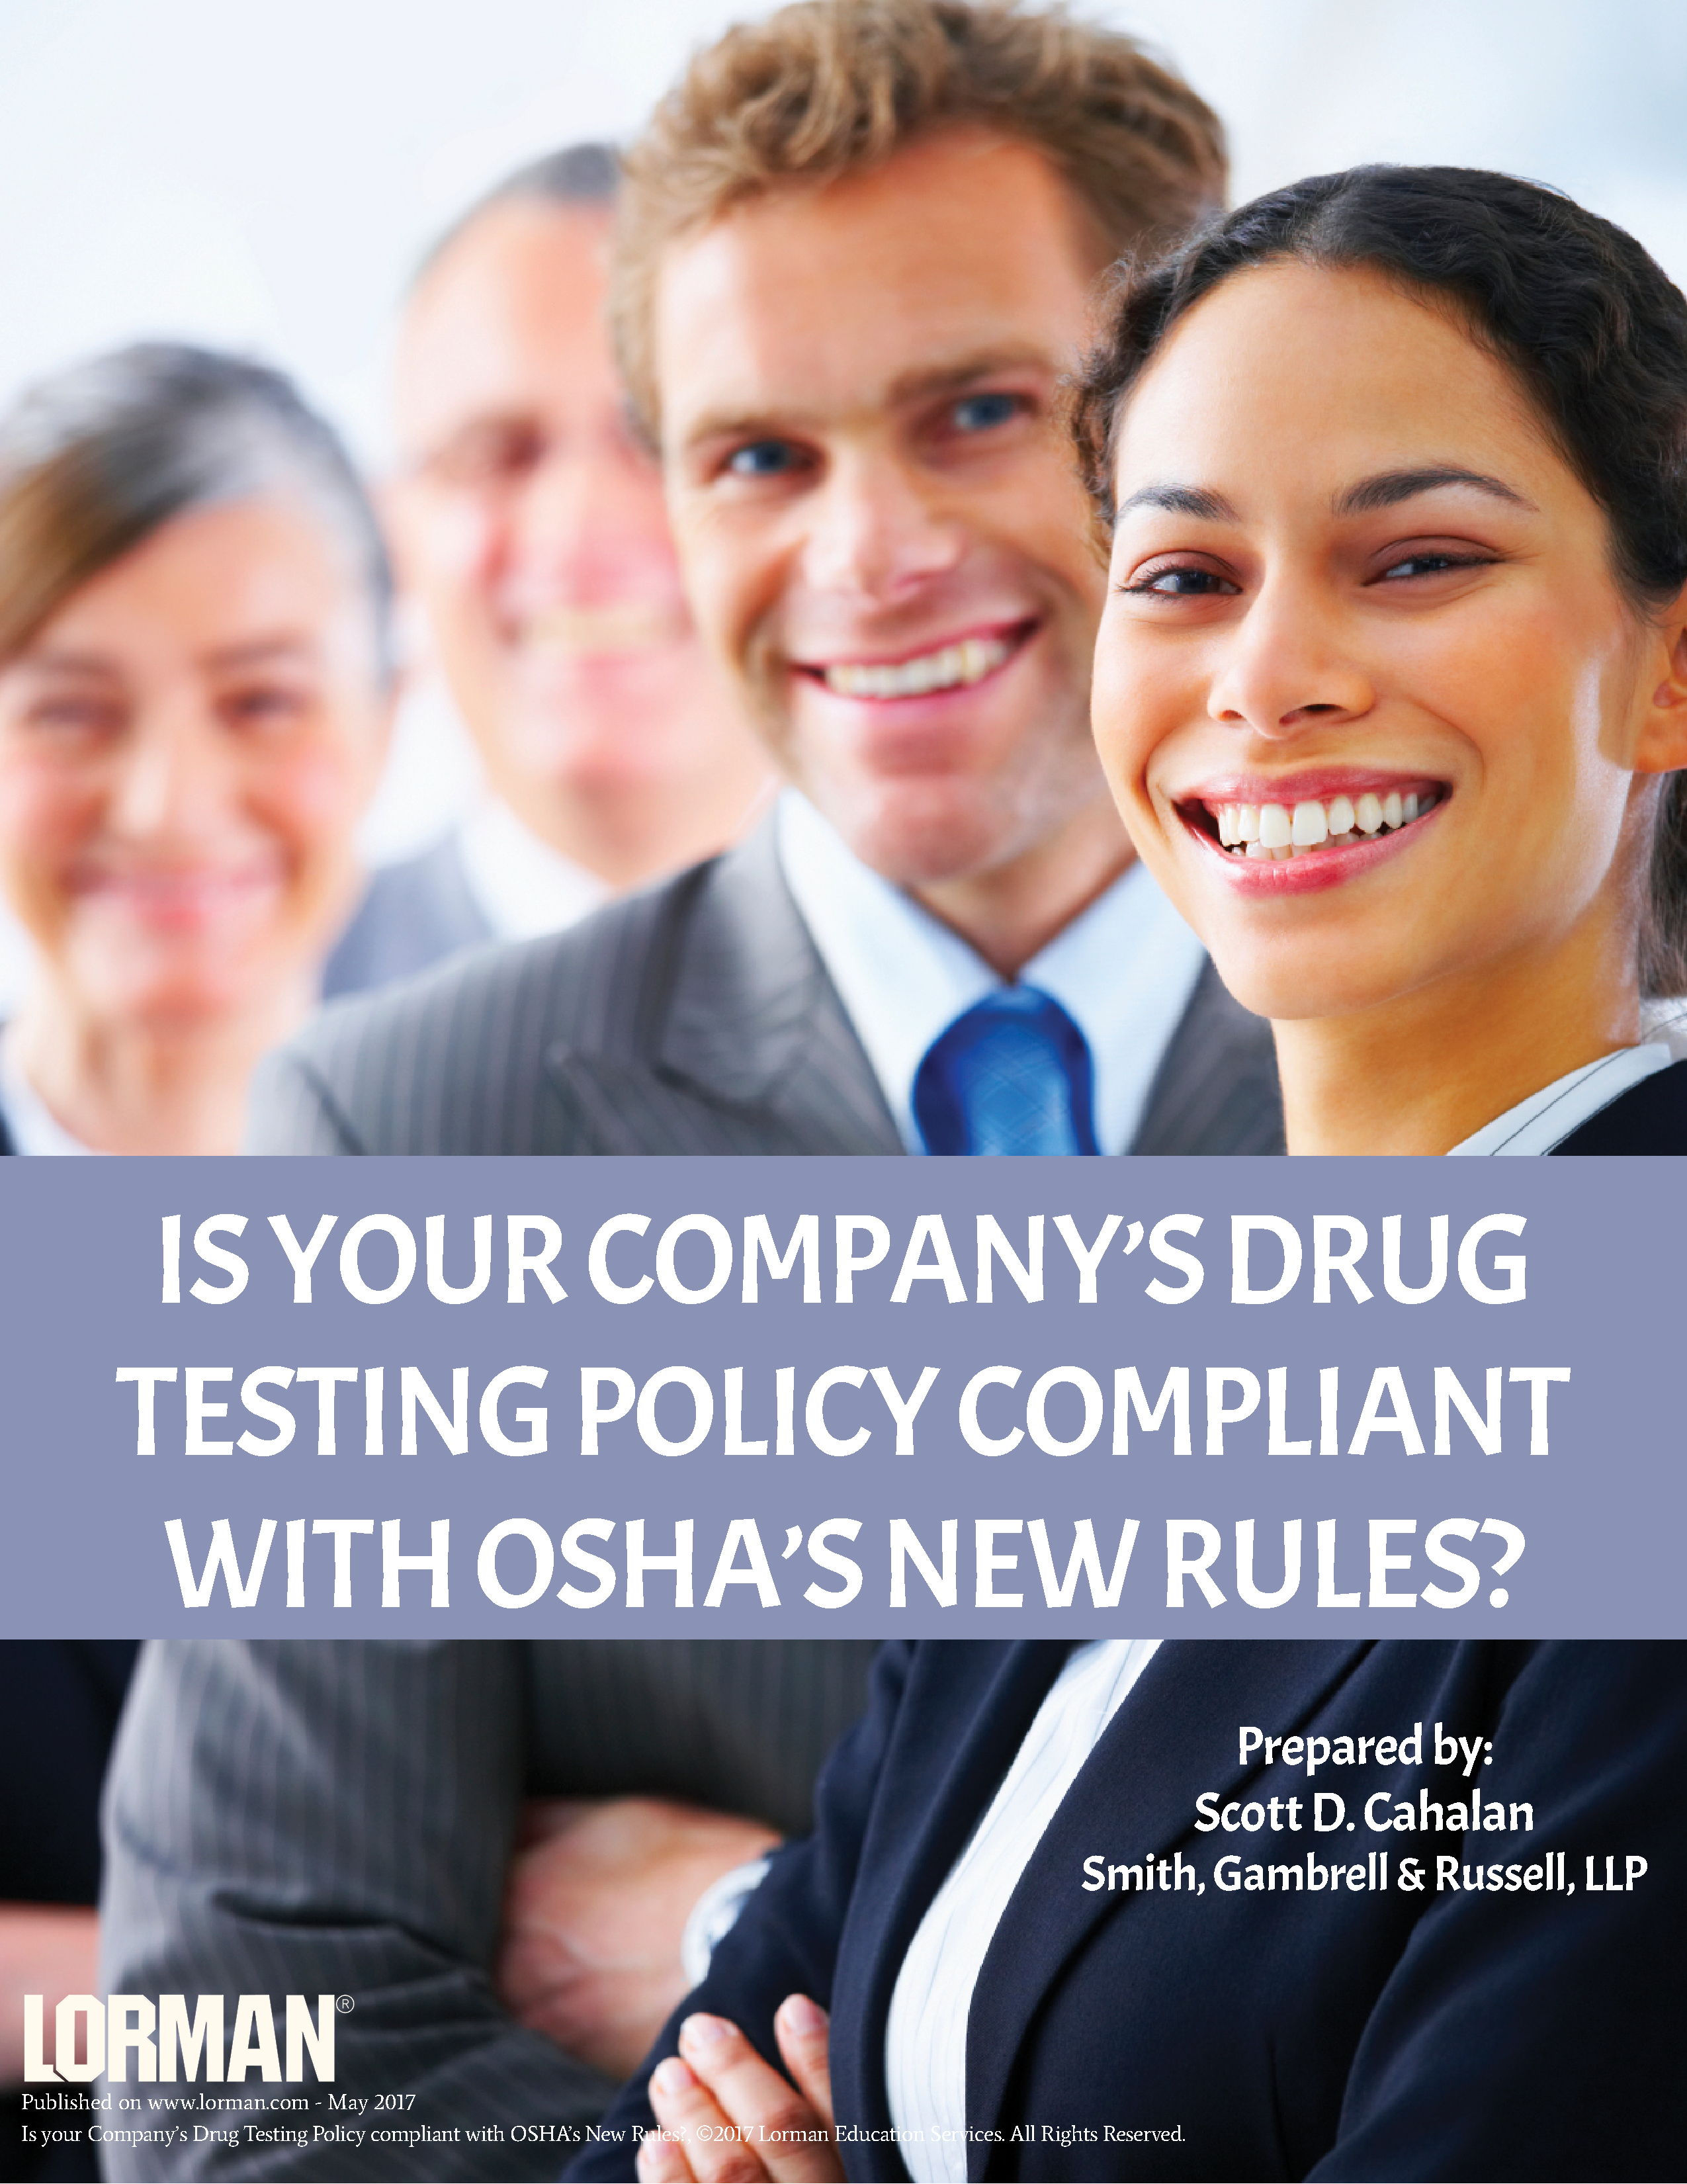 Is Your Company’s Drug Testing Policy Compliant With OSHA’s New Rules?